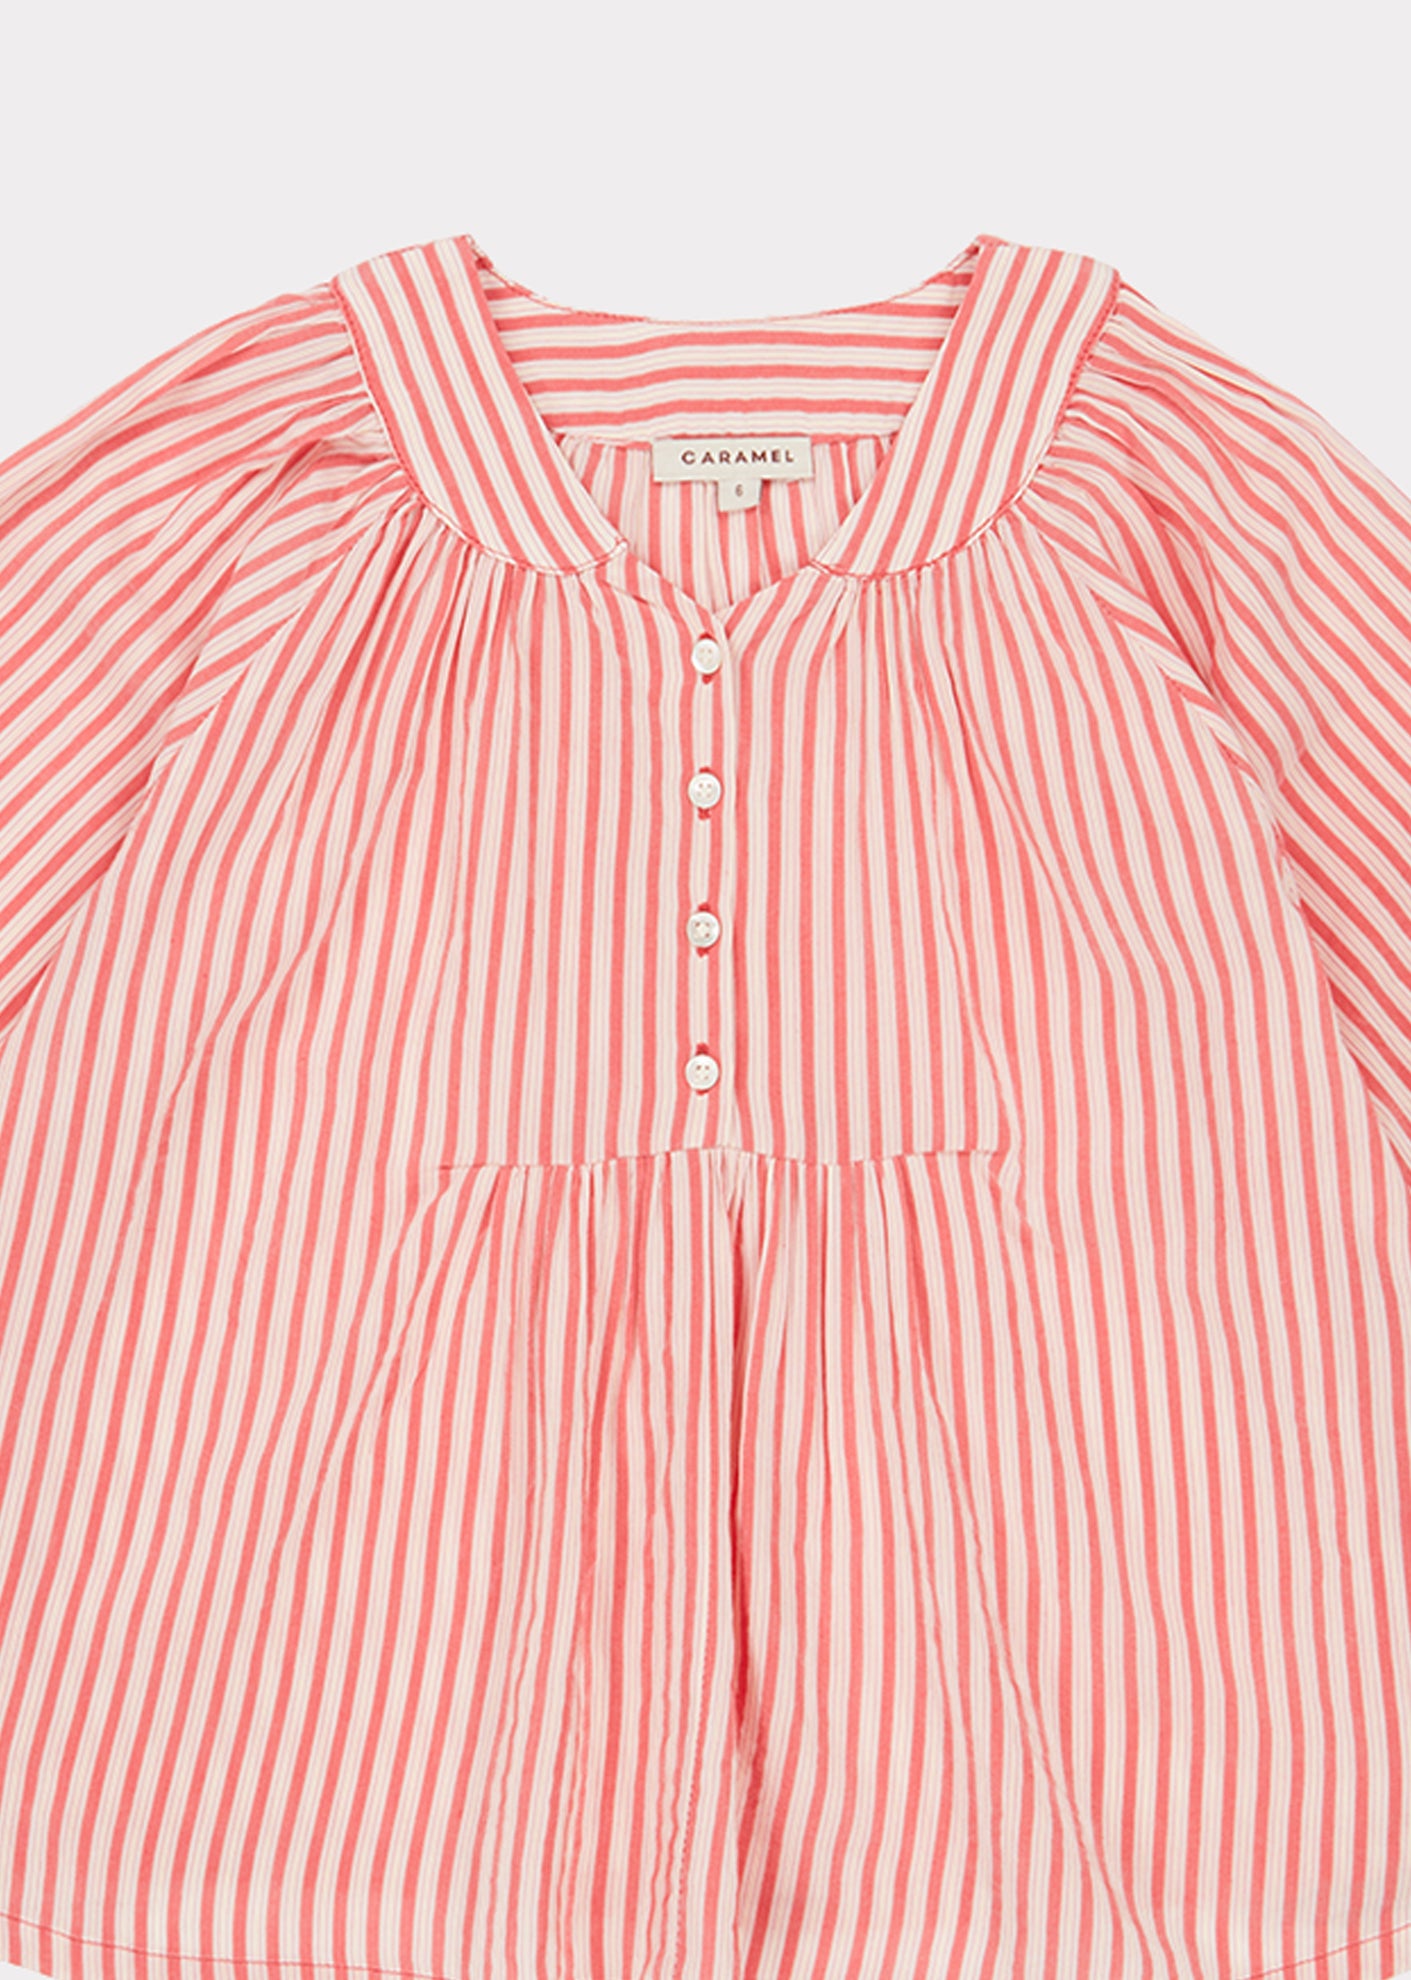 Girls Red Striped Top